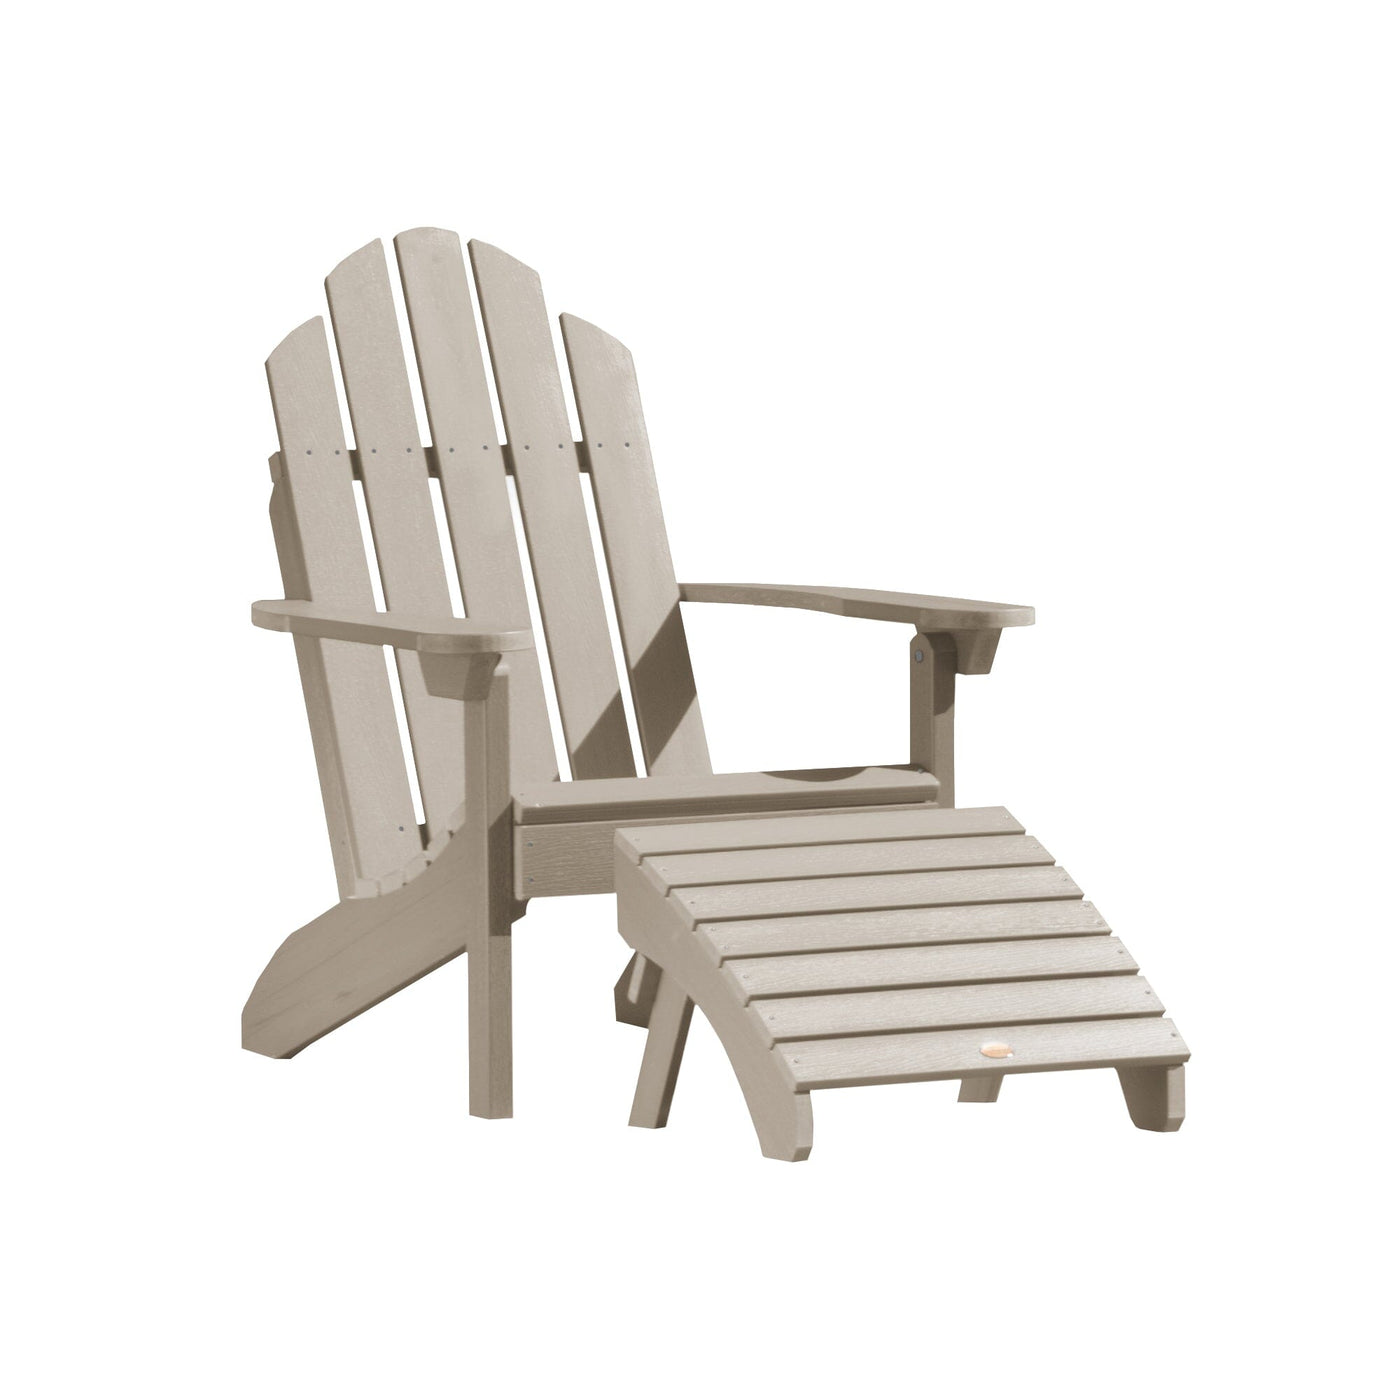 Classic Westport Adirondack Chair with Folding Adirondack Ottoman Adirondack Chairs Highwood USA Woodland Brown 